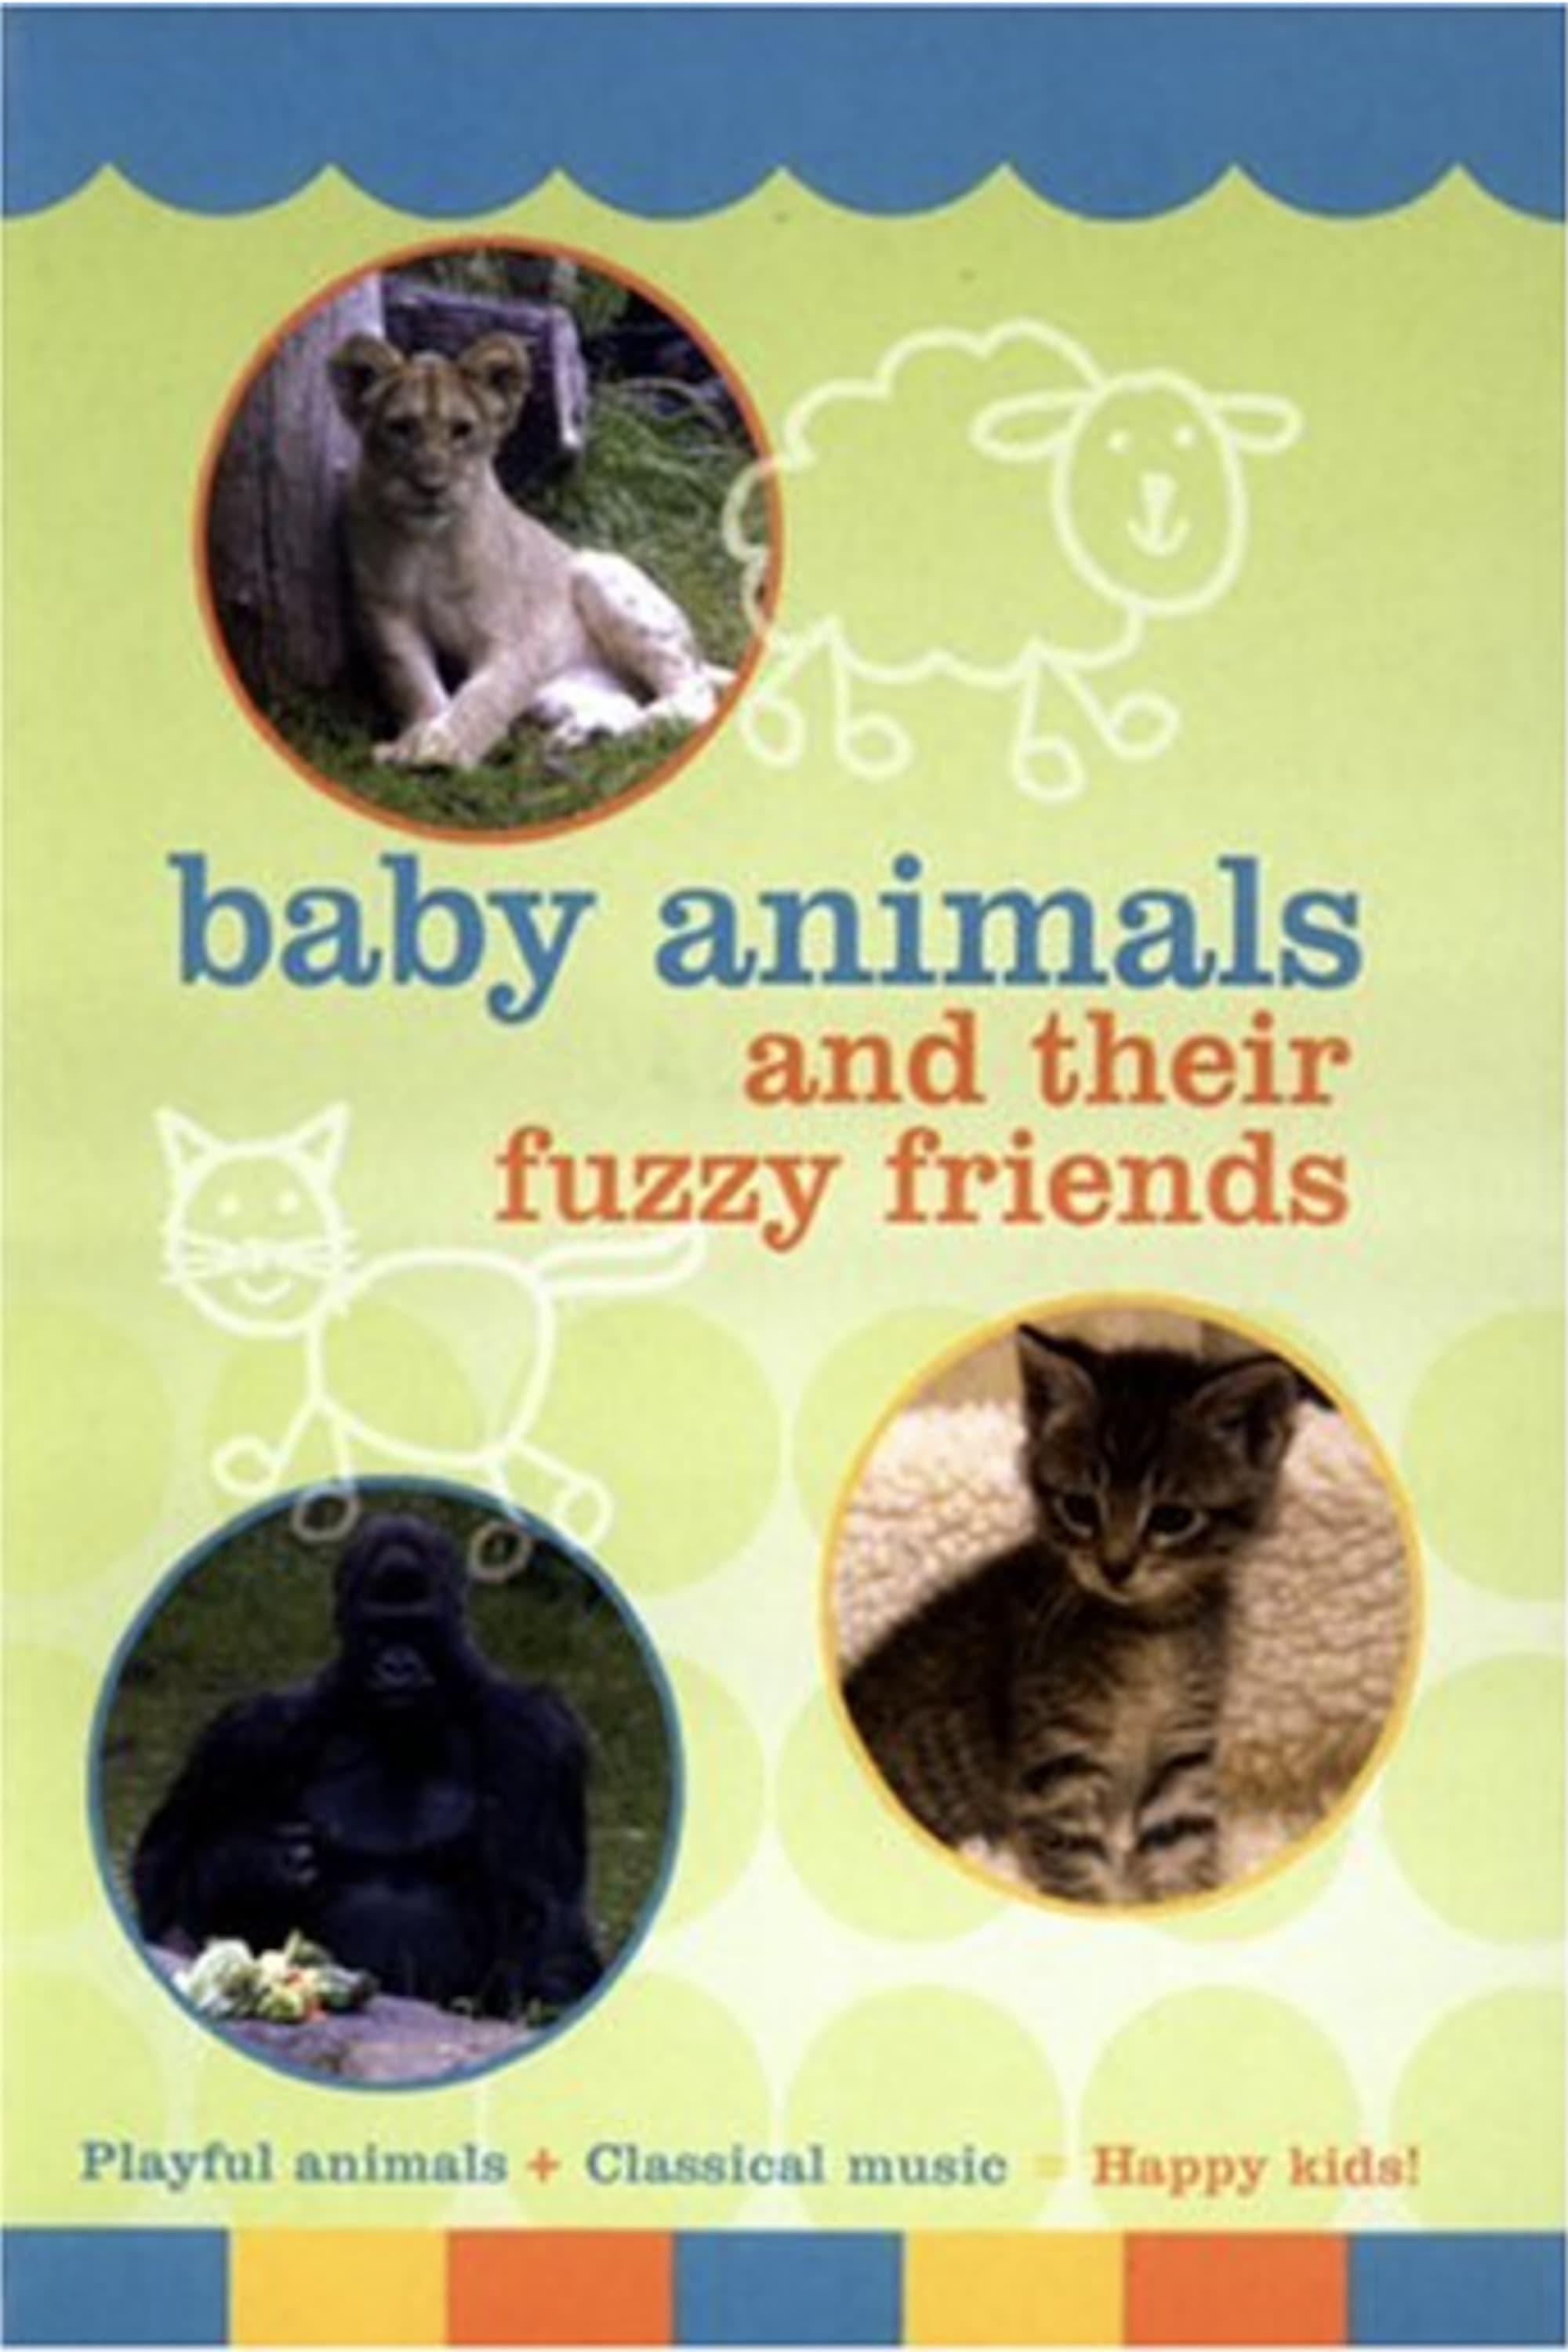 Baby Animals and their Fuzzy Friends